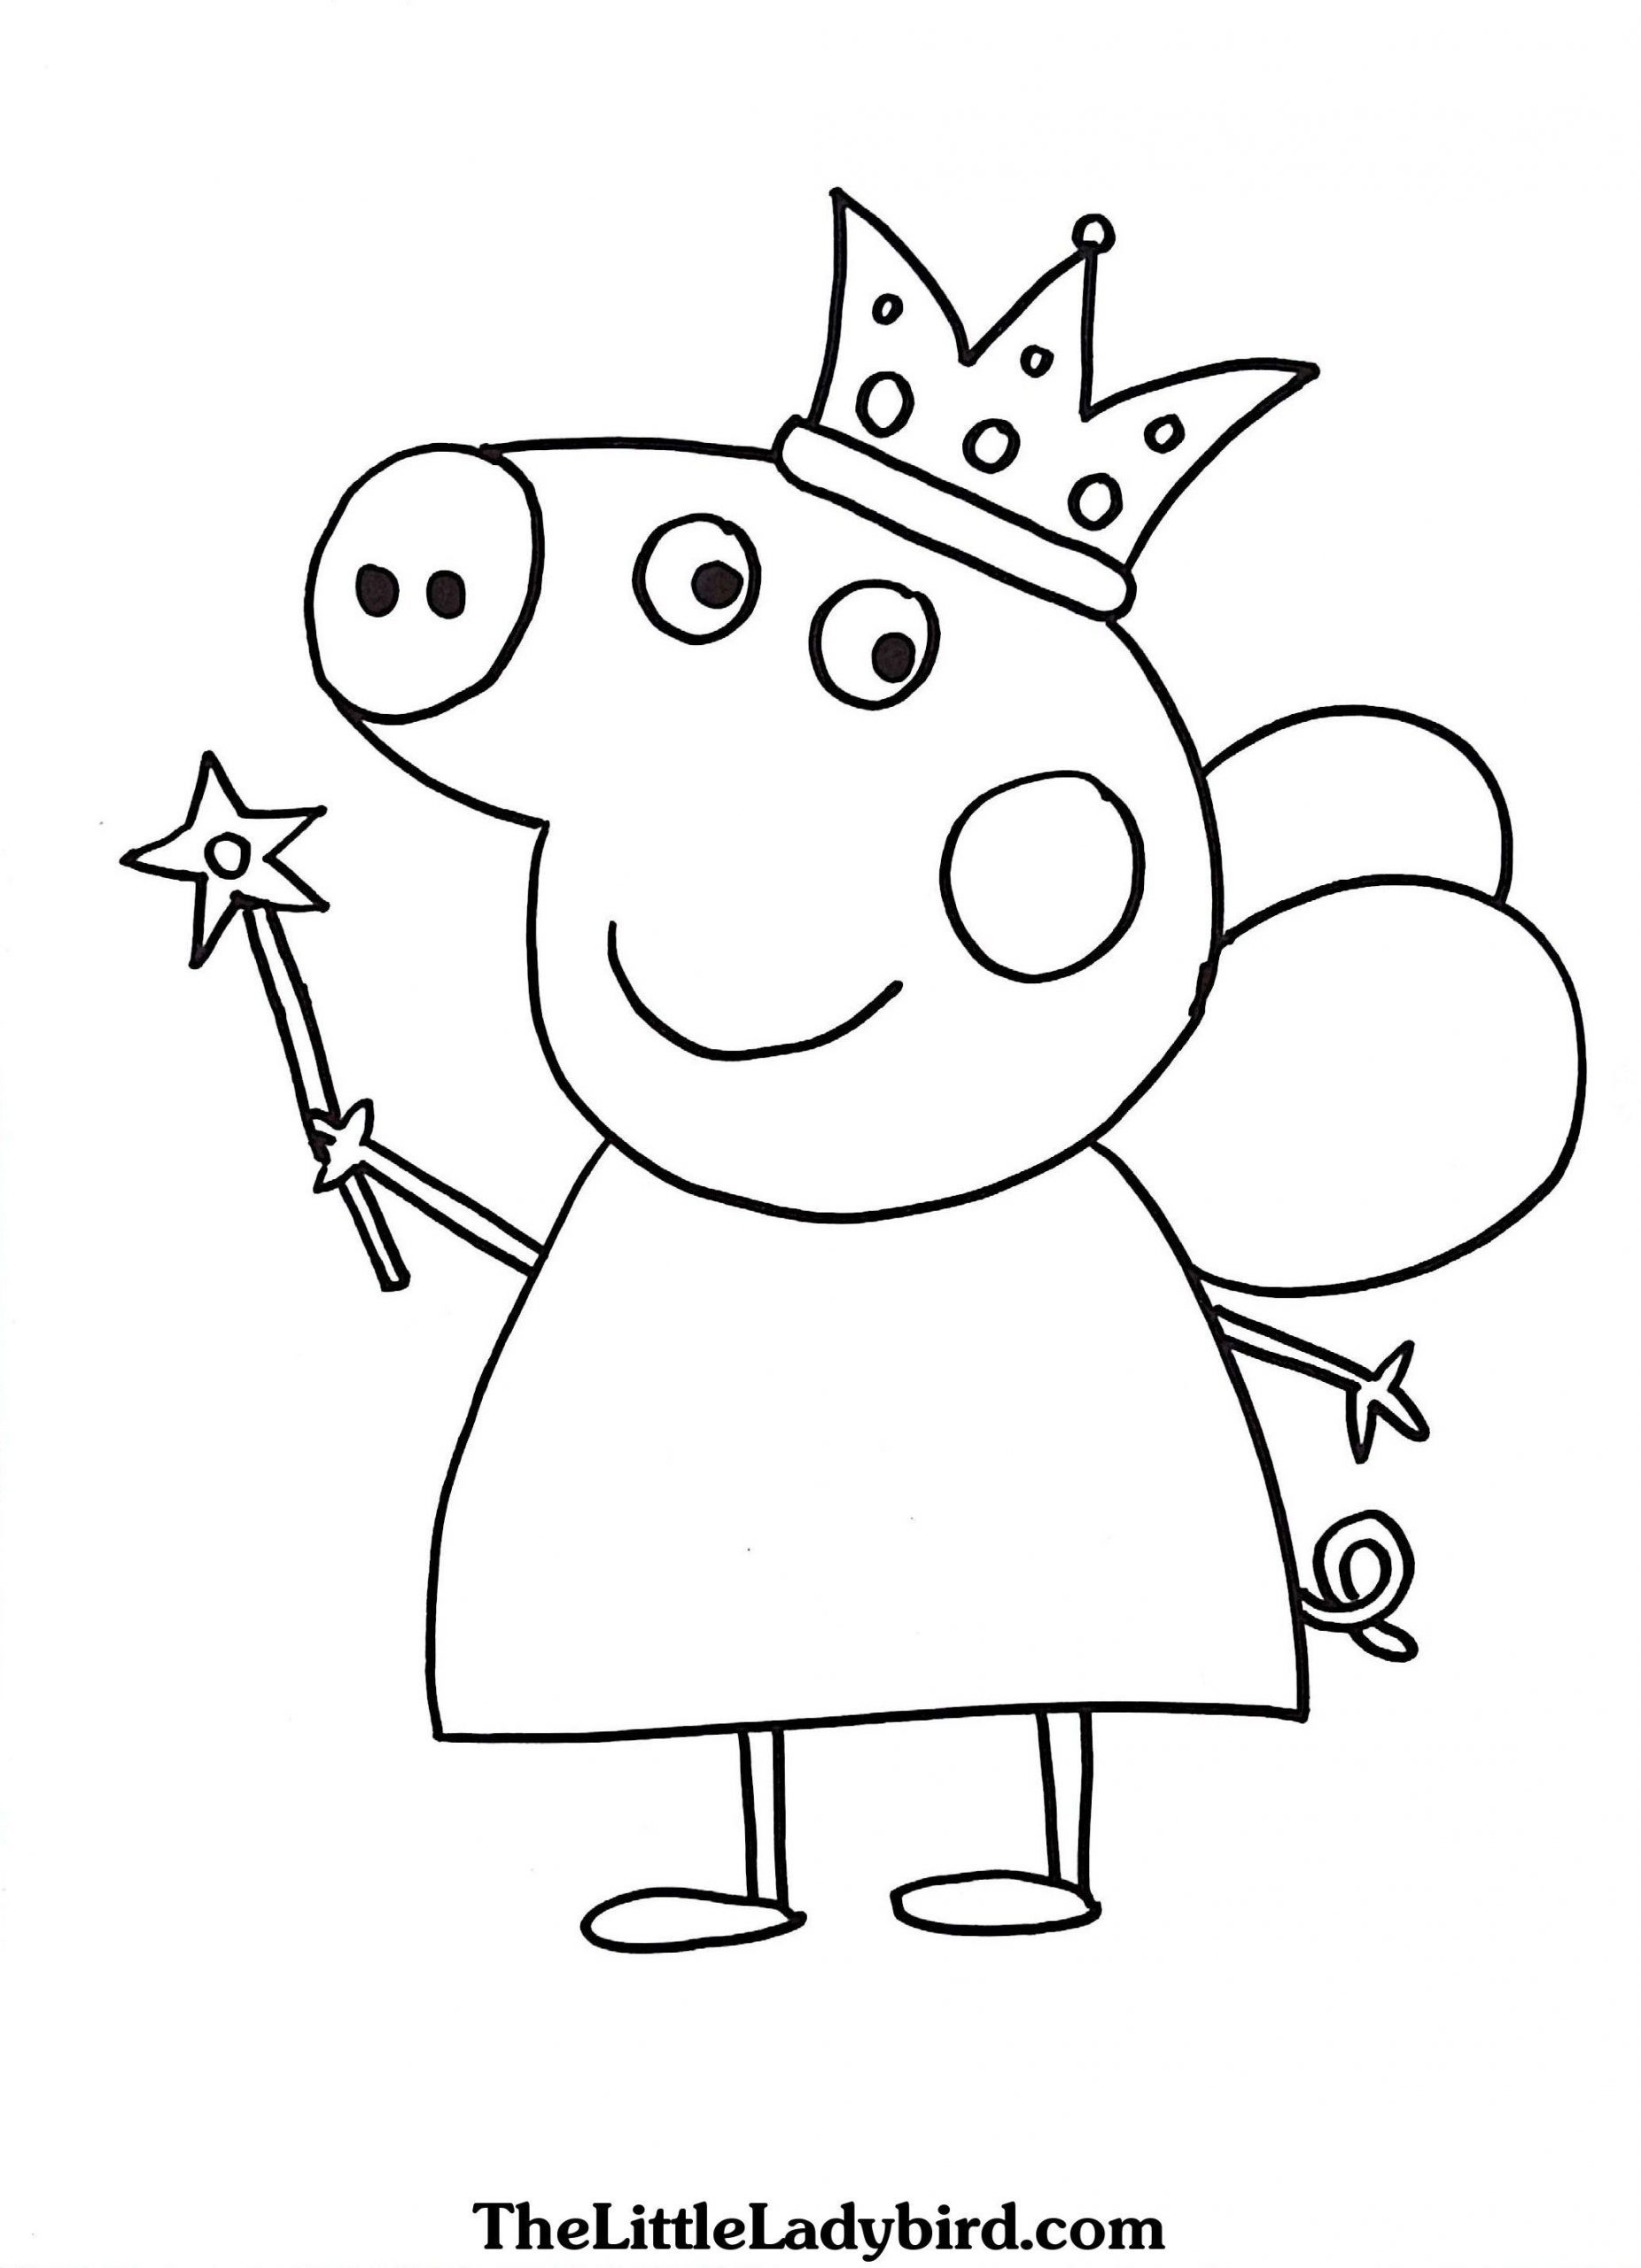 Coloring Pages : Coloring Pages Remarkable Peppa Pig Colouring Sheets  Valentines Youtube Remarkable Peppa Pig Colouring Sheets ~ Off-The Wall ATL